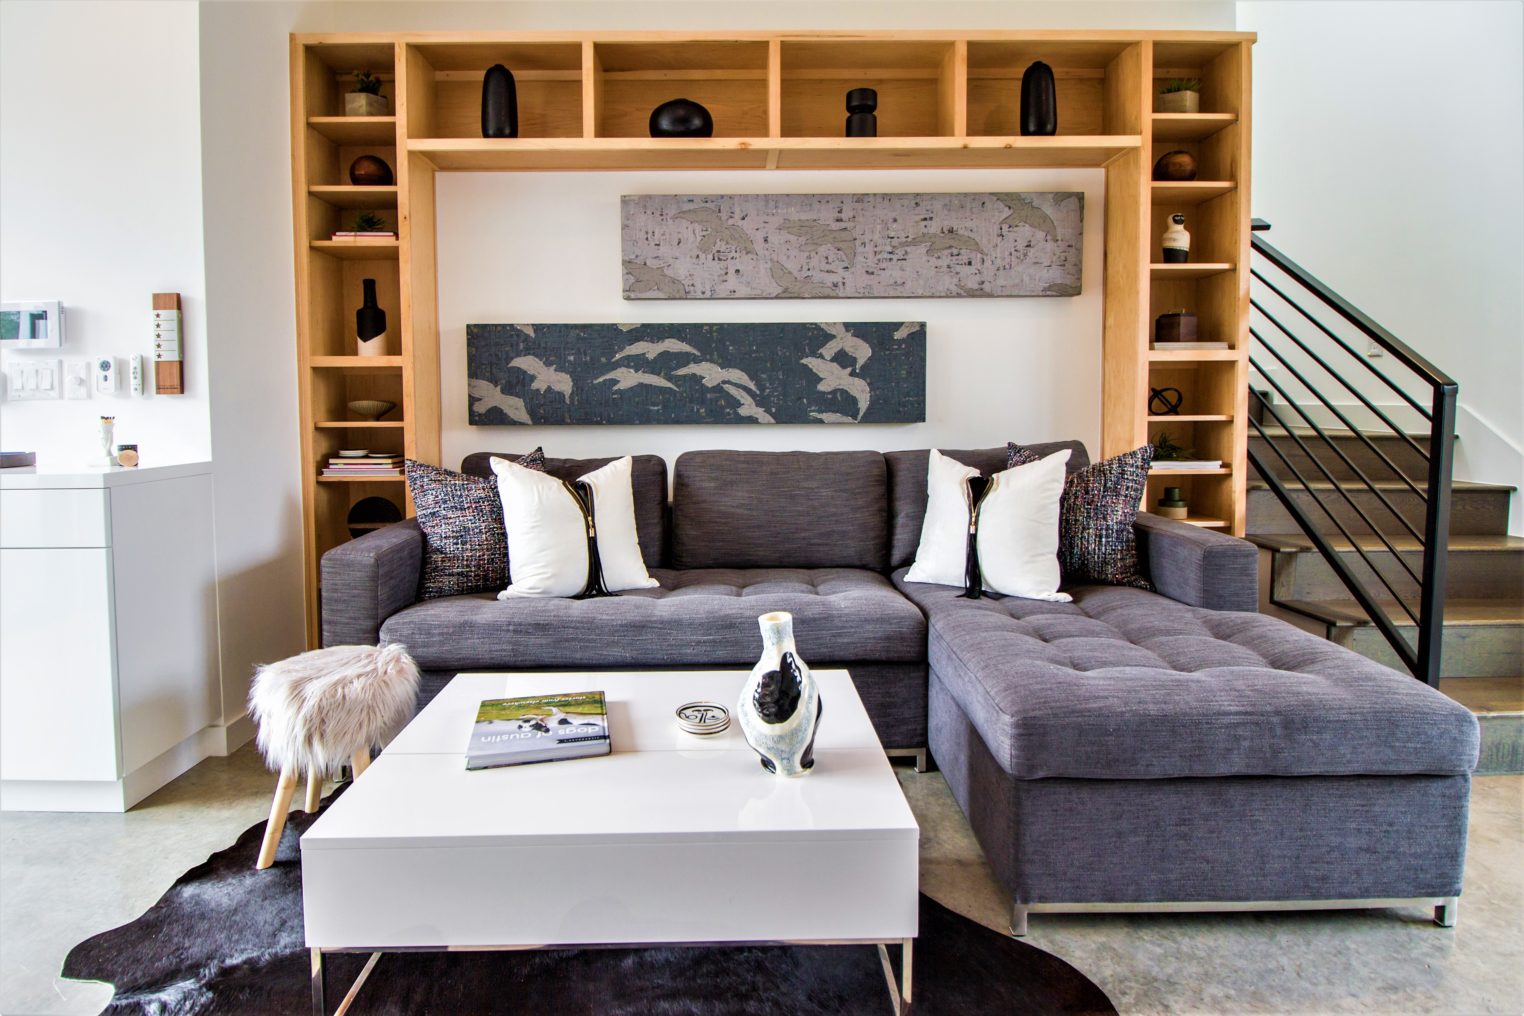 Living Room Staging by Vazzo Spaces for the Newcastle Home on the 2019 Austin Modern Home Tour. Check out details on The Pillow Goddess blog!